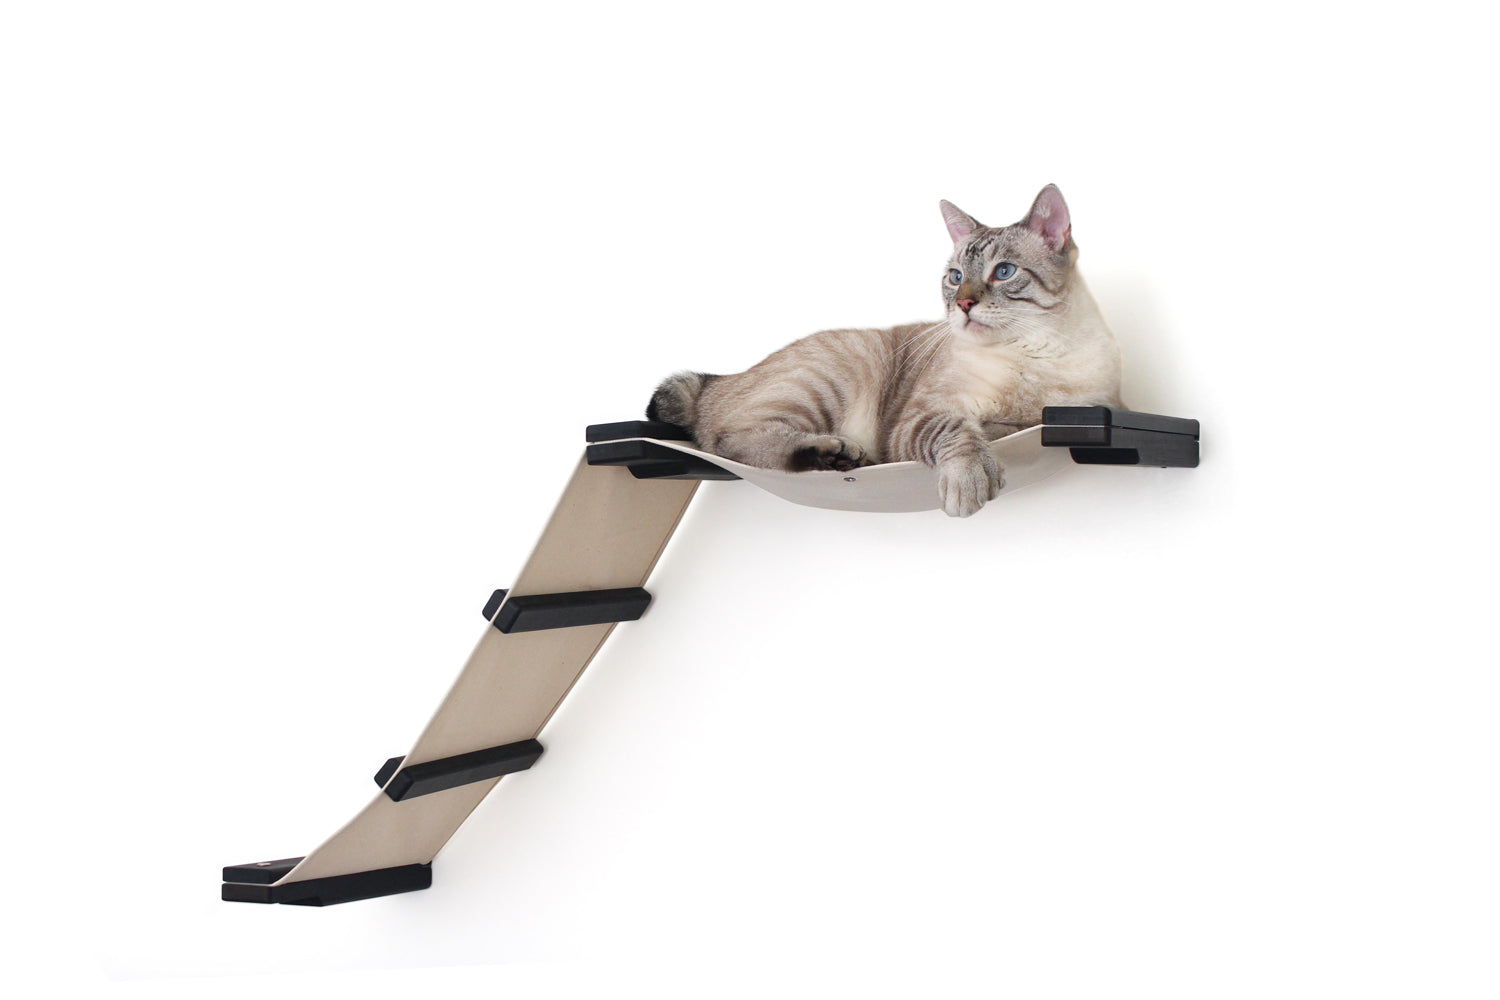 This photo displays our cat lounging on the Lift. This image shows the Lift in Onyx, a black stain, and has Natural fabric, a light tan color.